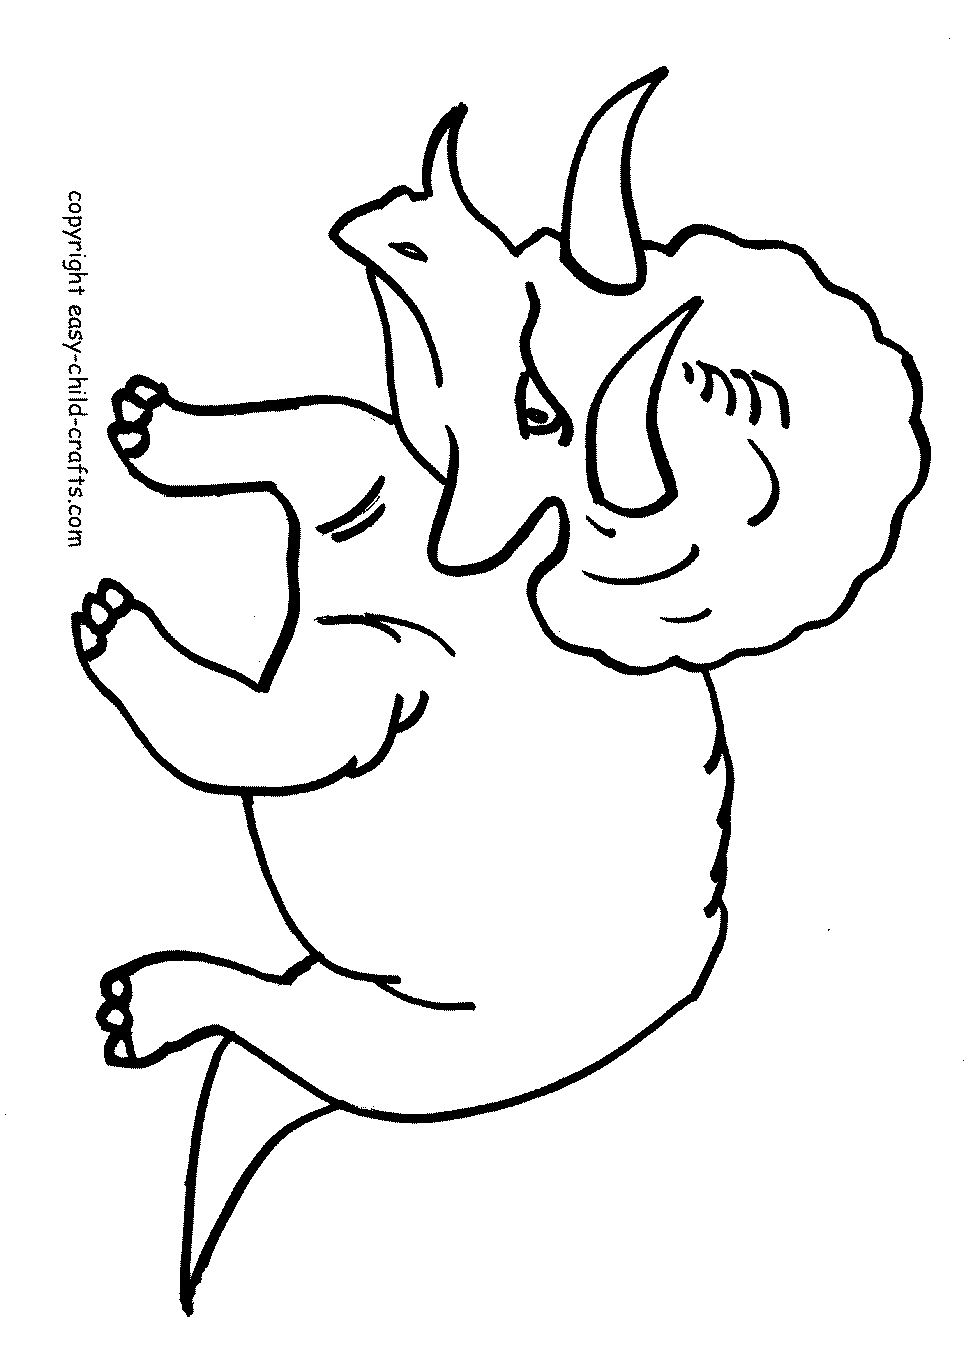 dinosaur colouring pages free printables free printable dinosaur coloring pages for kids free printables colouring pages dinosaur 